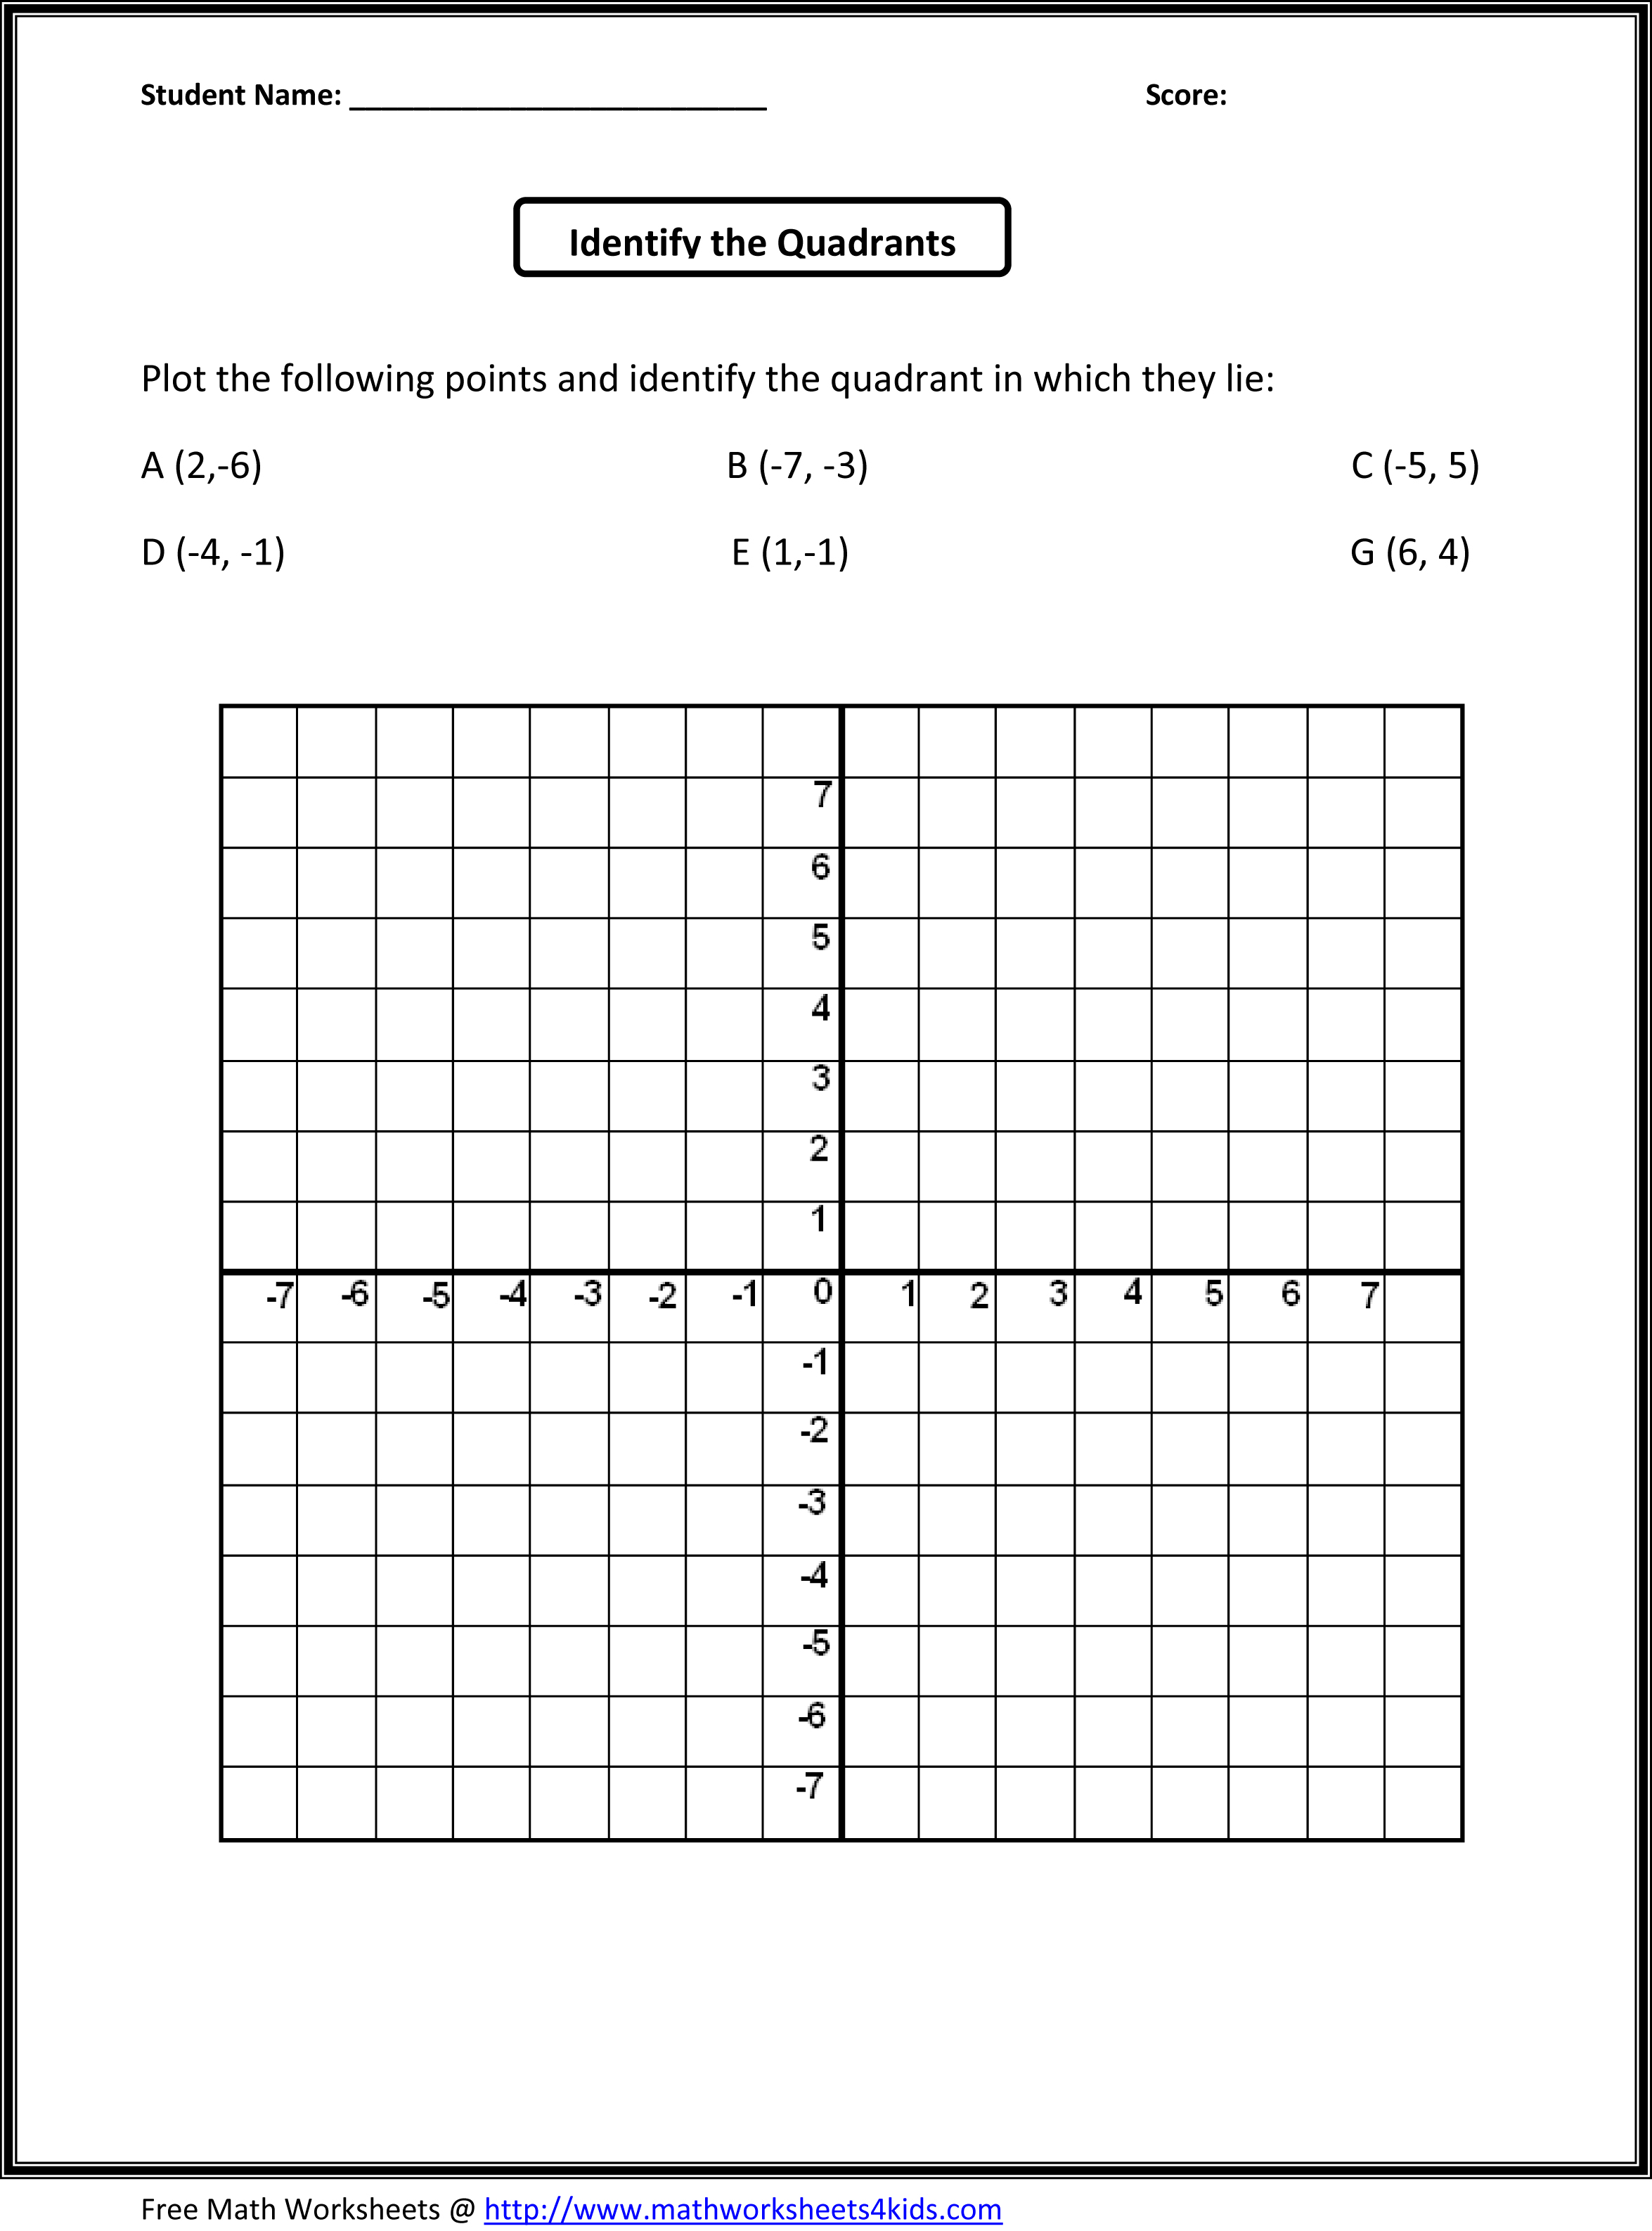 graphing-worksheets-3rd-grade